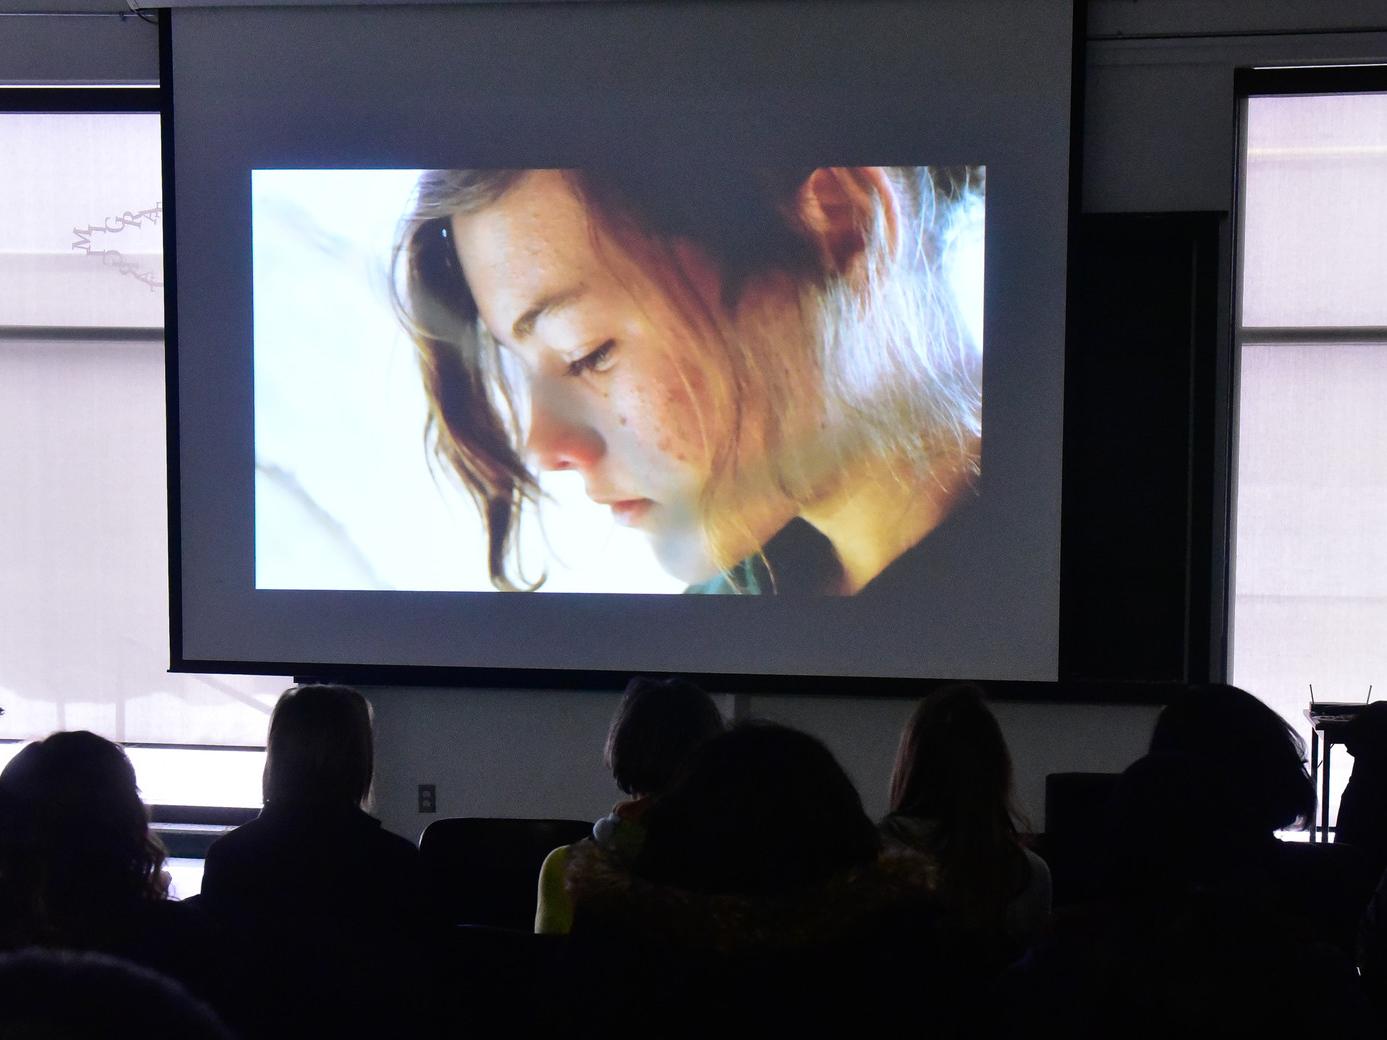 A still from a film, close shot of a young woman's face, with students watching the screen in the foreground